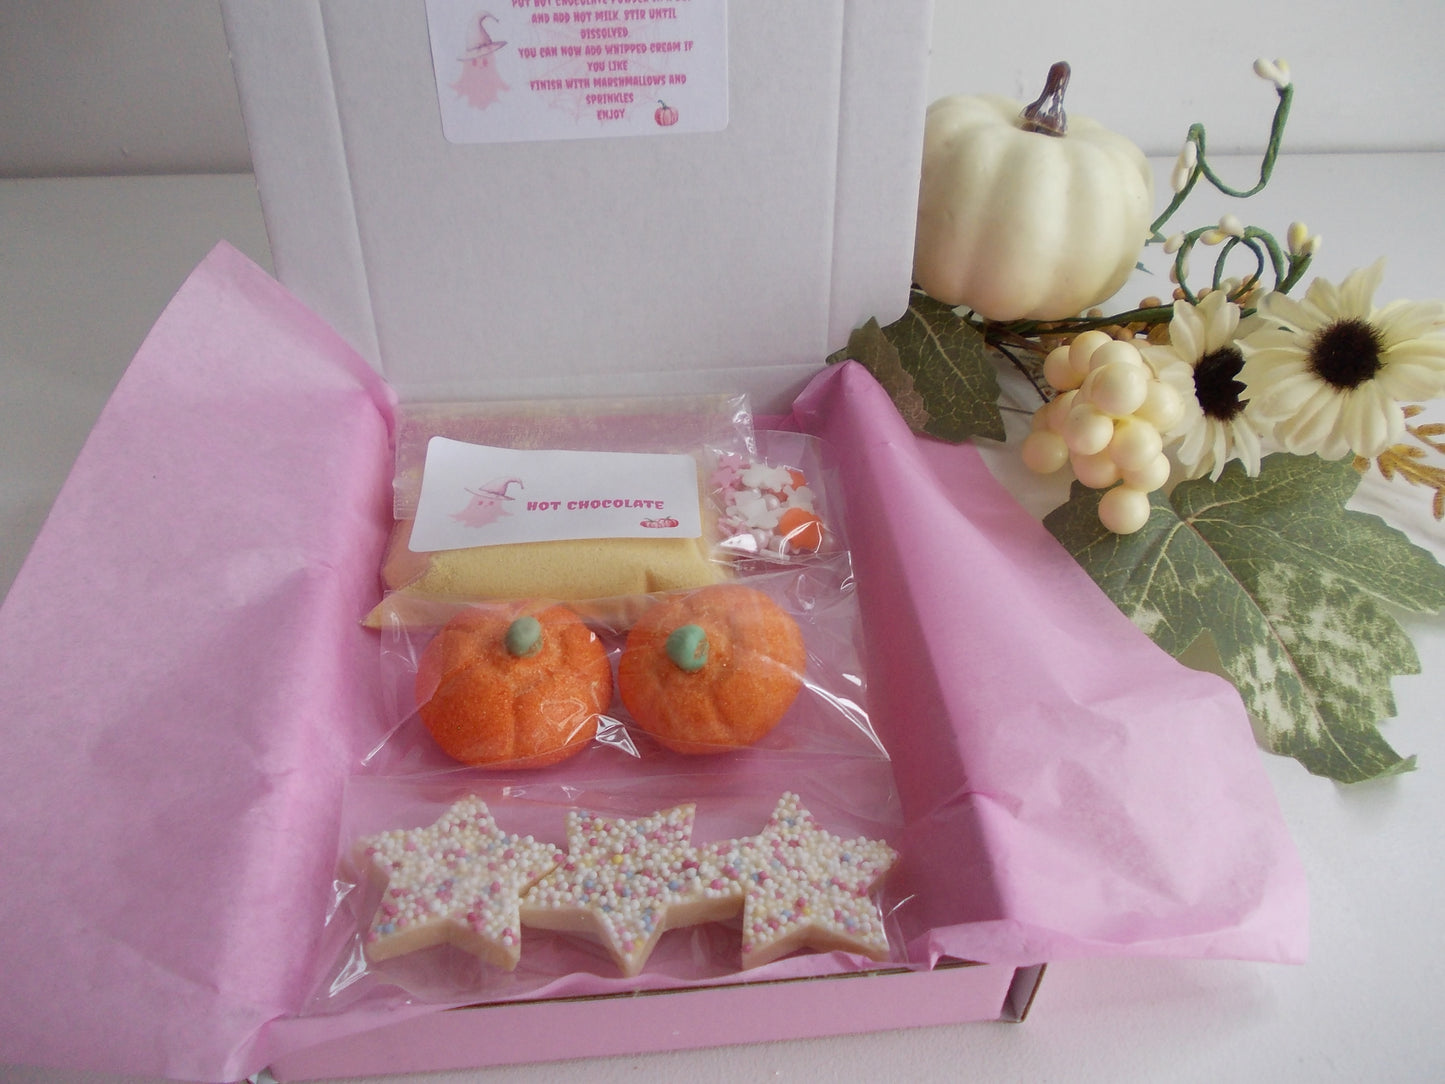 Pastel Halloween Hot Chocolate kit, trick or treat gift. kids or adults will love this letter box gift set